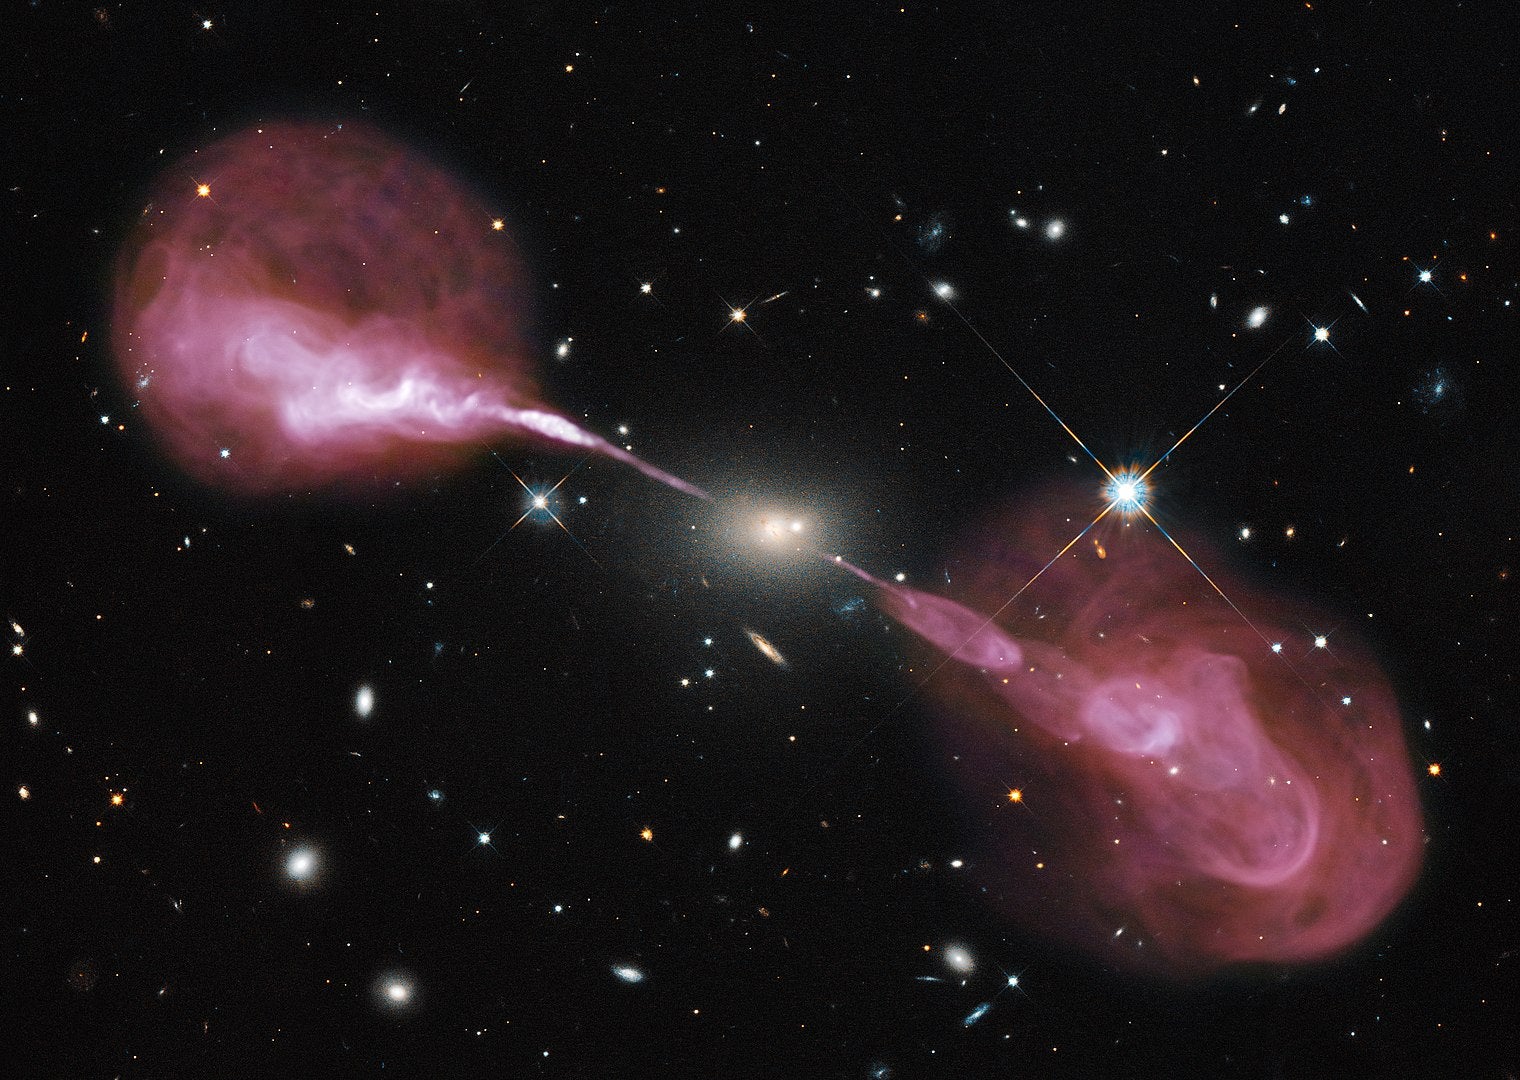 A radio image shows energy streaming from the heart of radio galaxy Hercules A